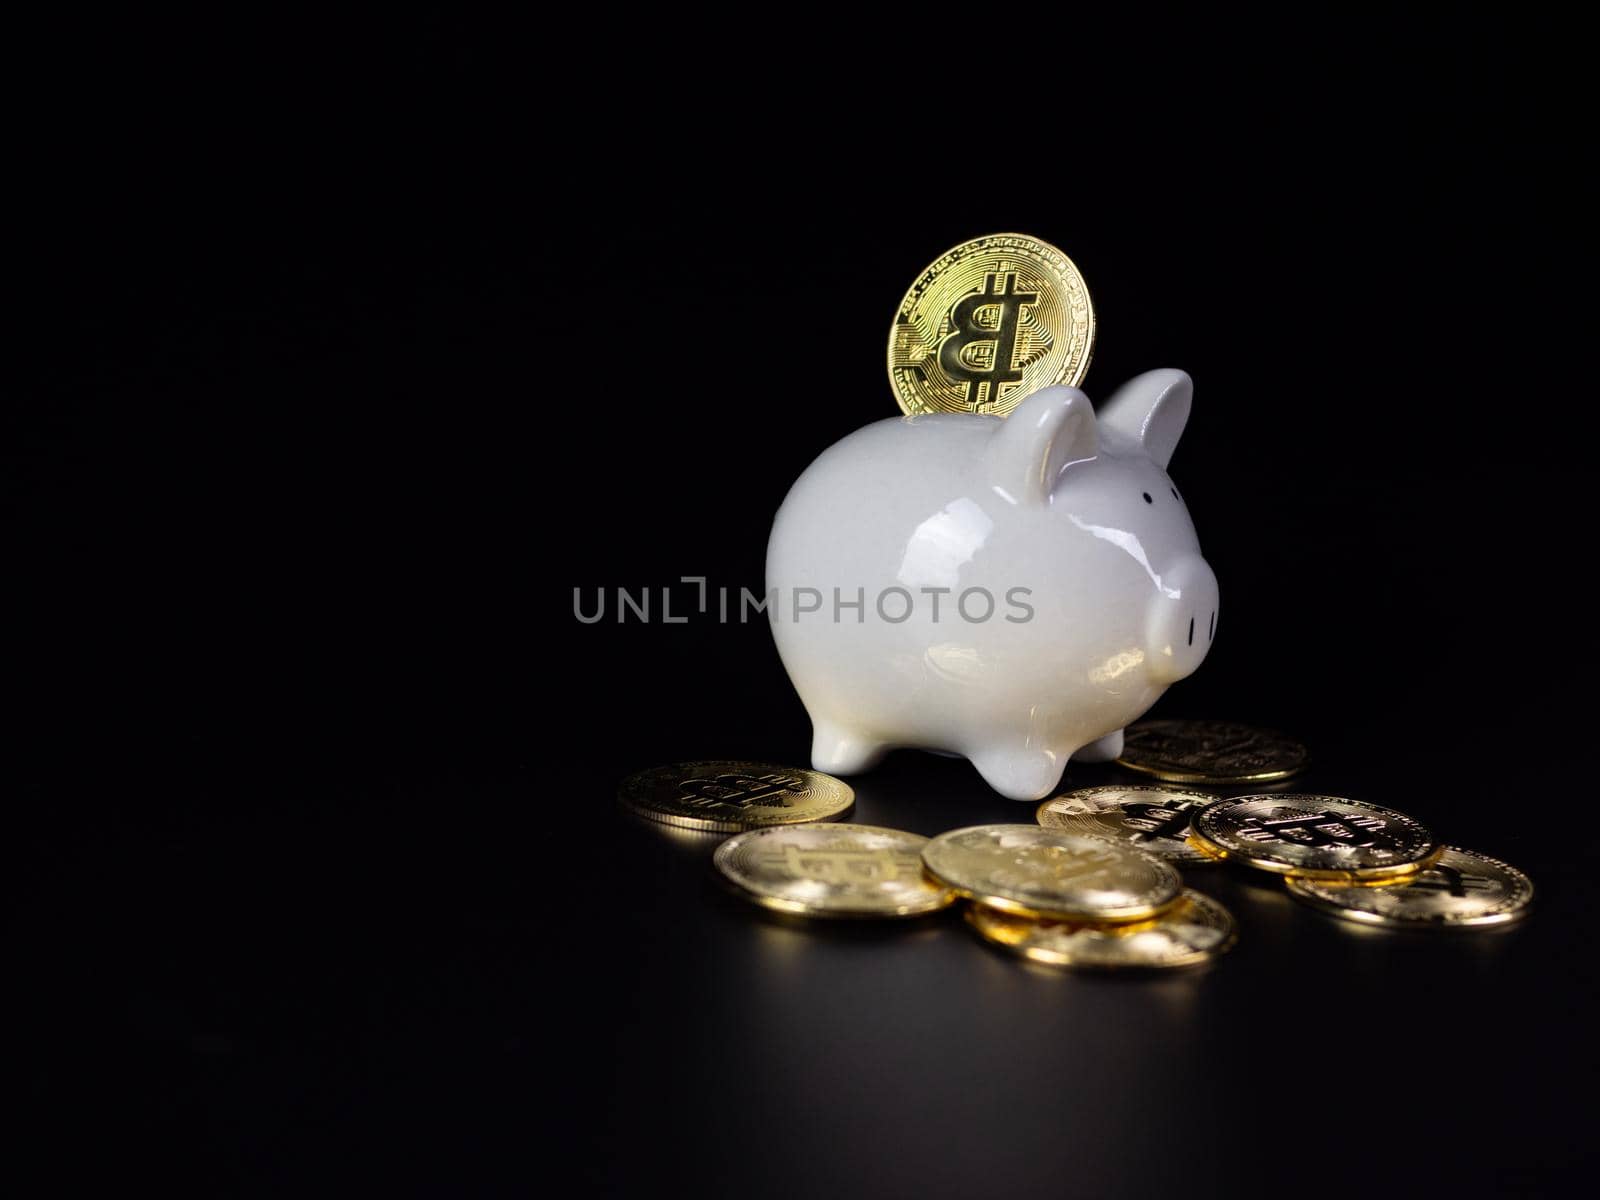 Bitcoin coins are on the back of a white piggy bank. on a black background by Unimages2527